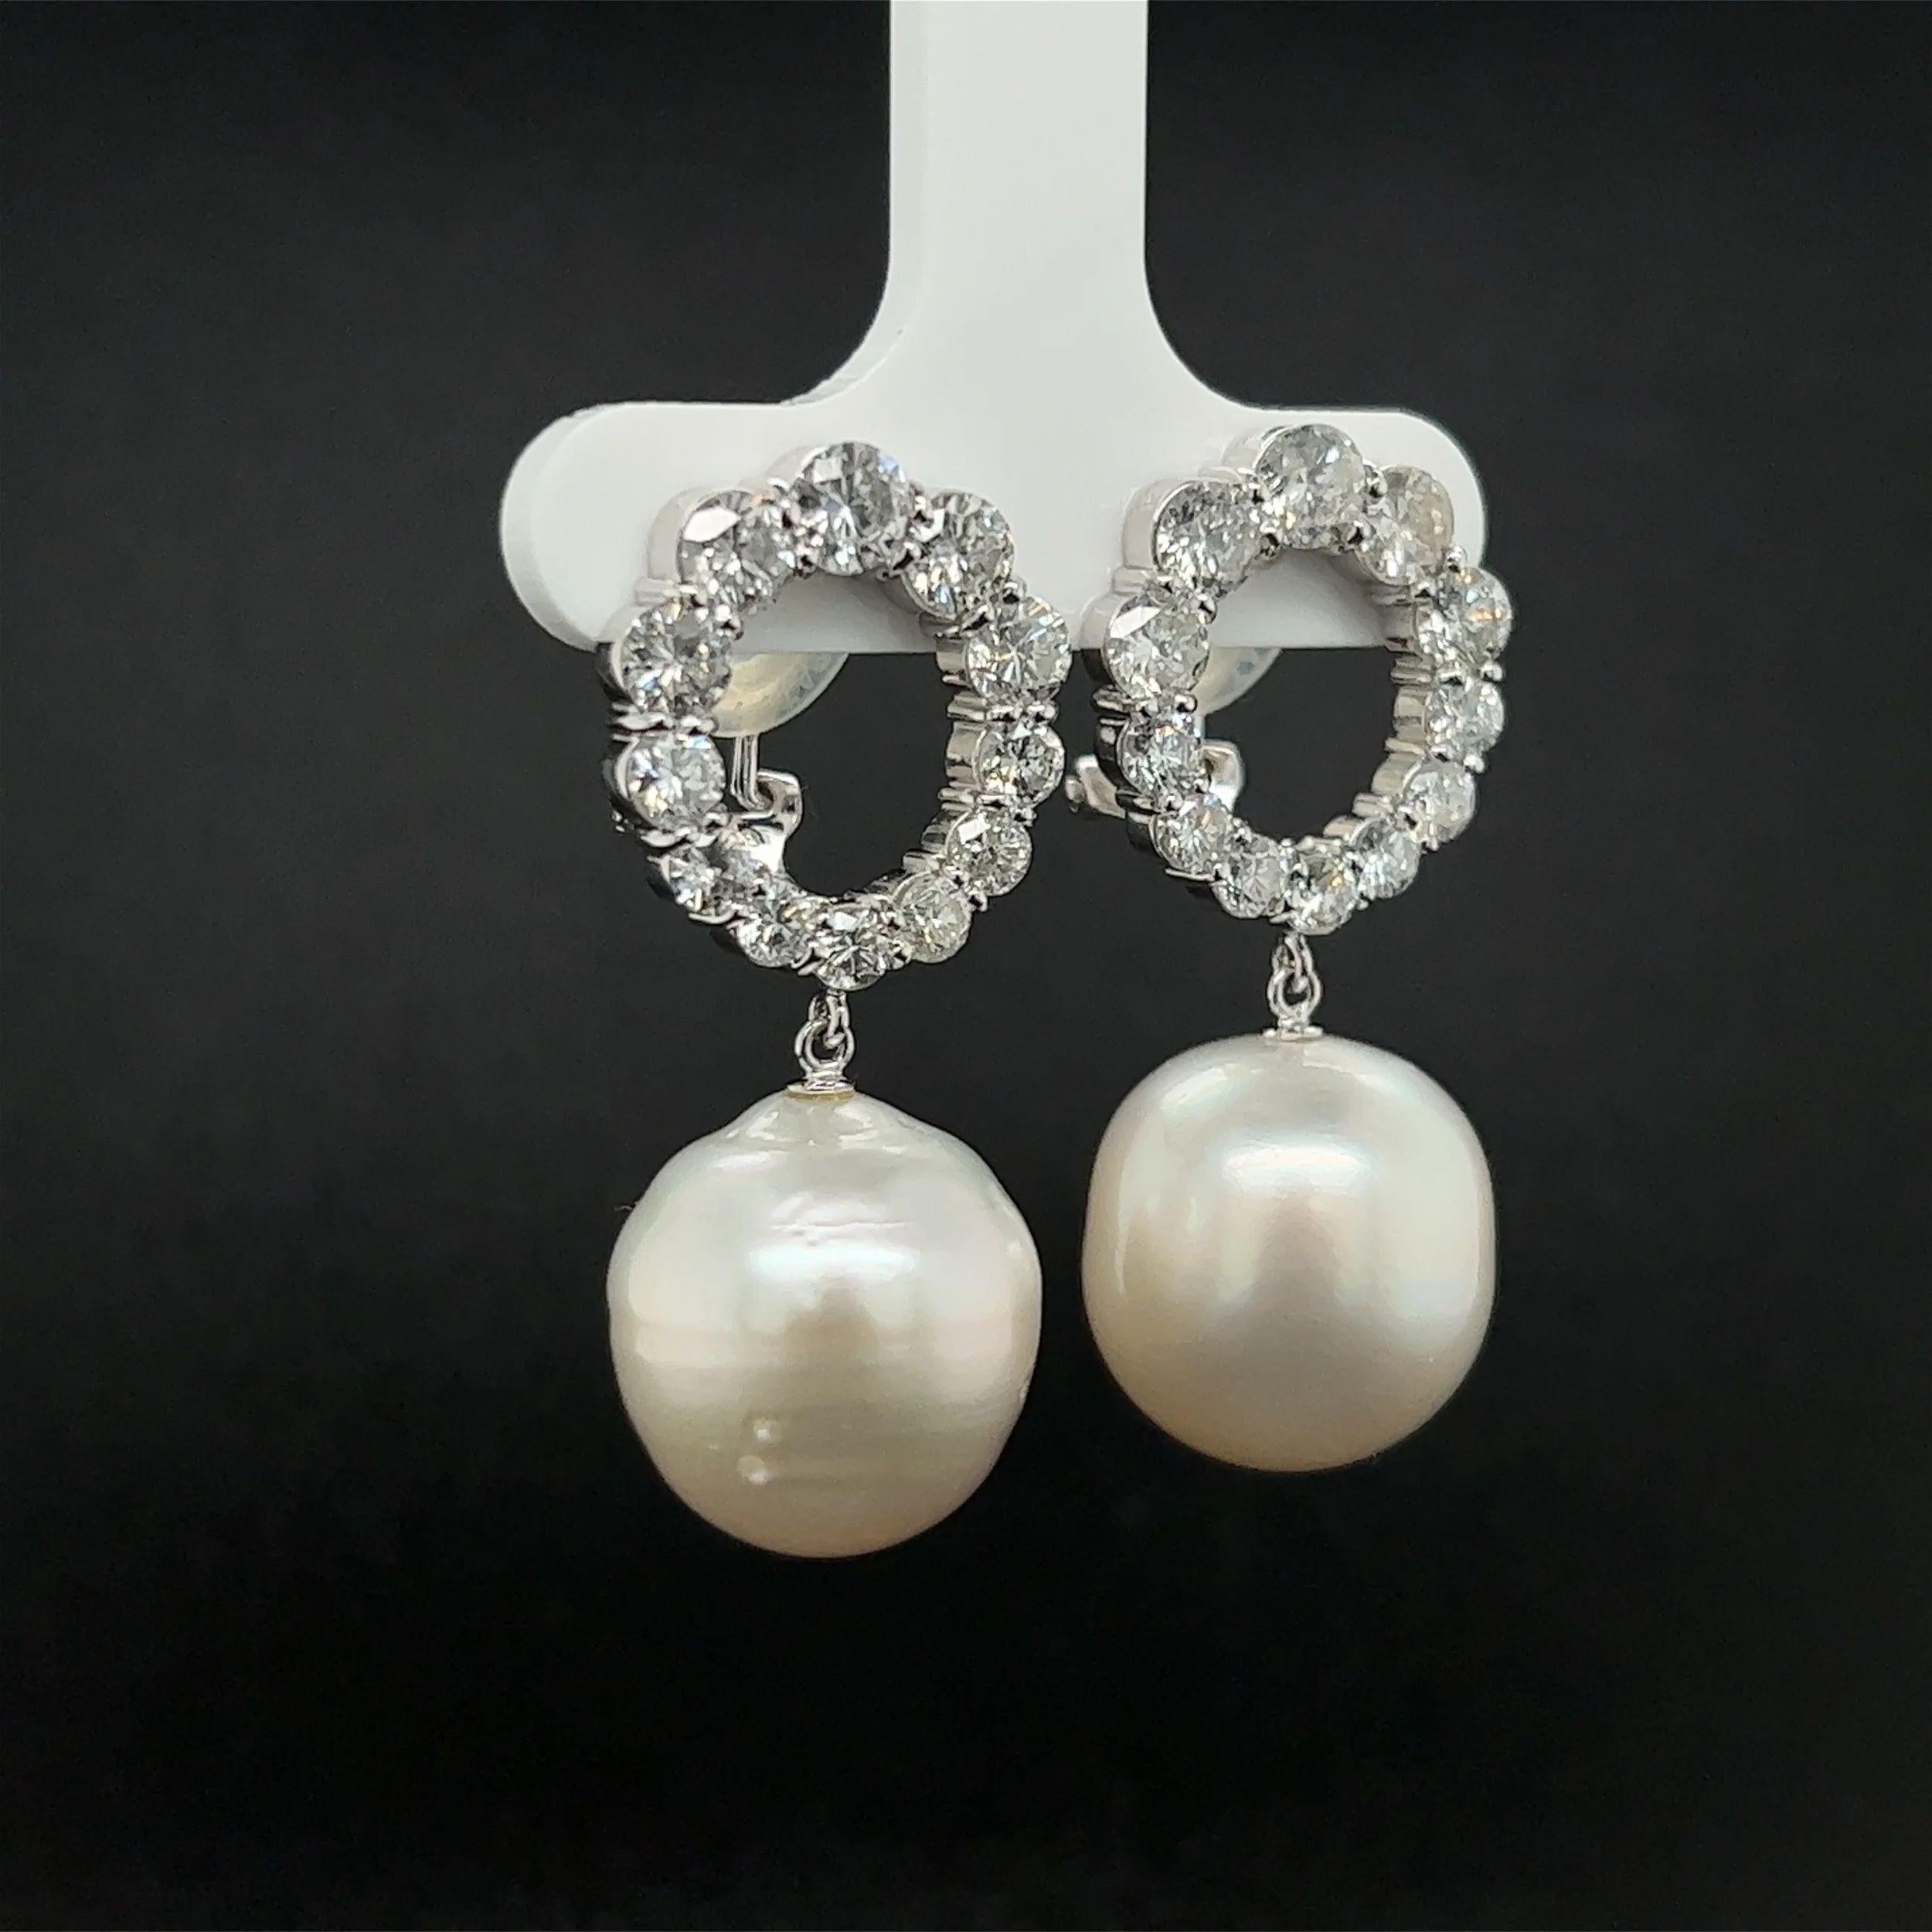 Simply Beautiful! 14.5mm White Pearl Drop Platinum Earrings. Each earring suspended from circular a top, Hand set with SI-I2 White Diamonds, approx. 3.18tcw. Hand crafted Platinum mountings. Tops marked: PT900 1.60